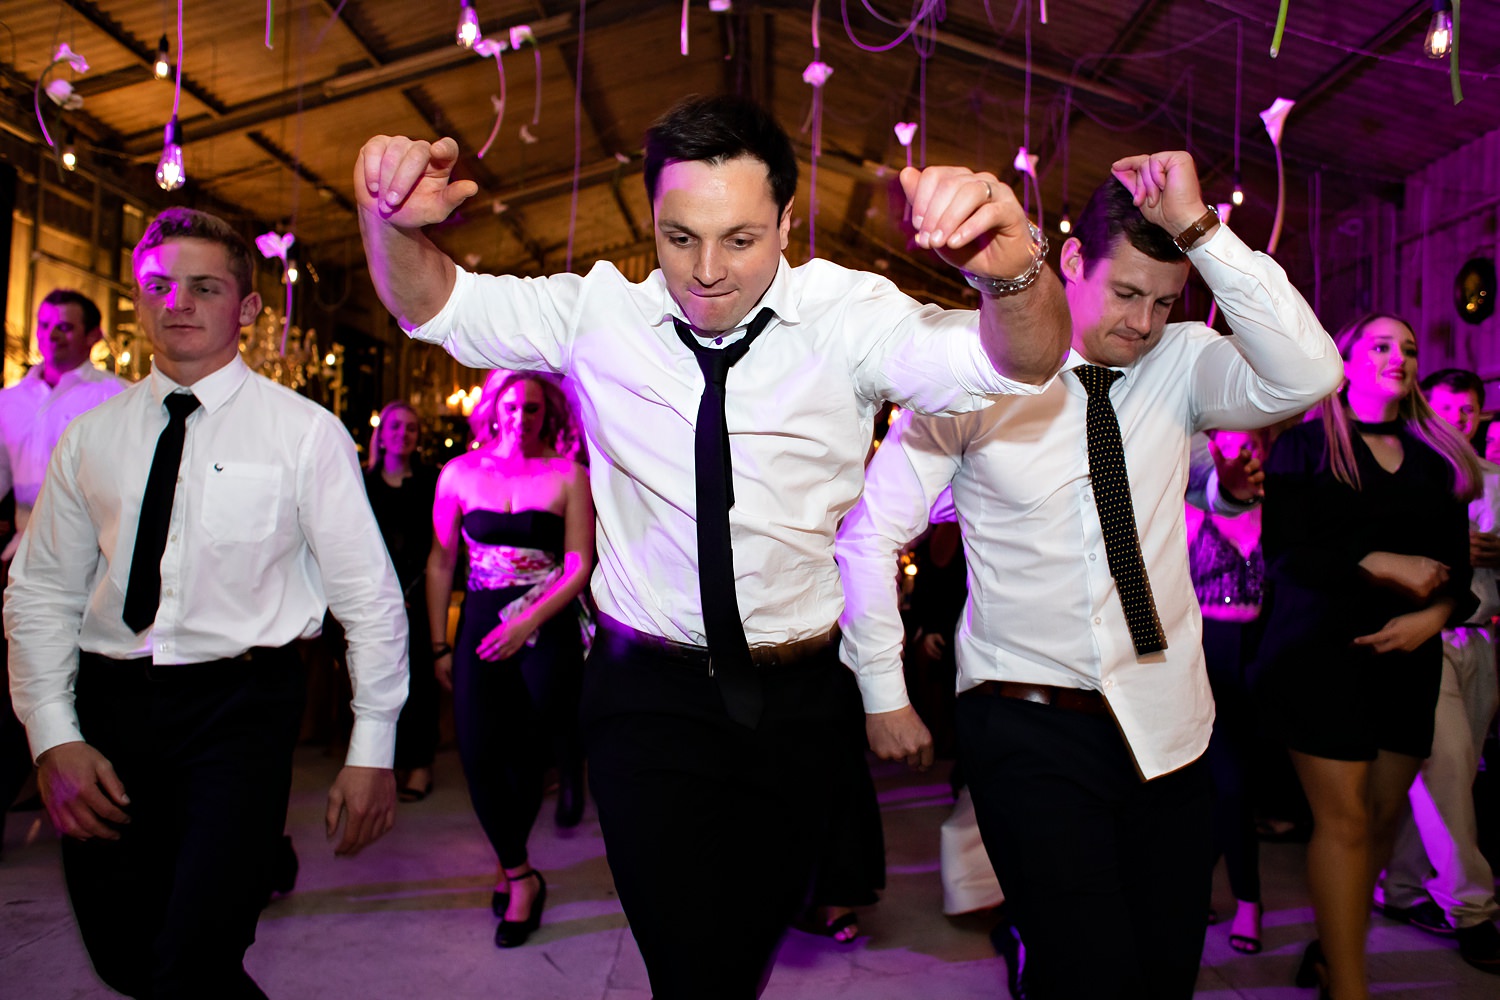 South African wedding guests dance to cha cha slide as pink parquet lights illuminate the background in this image by wedding photographer Niki M